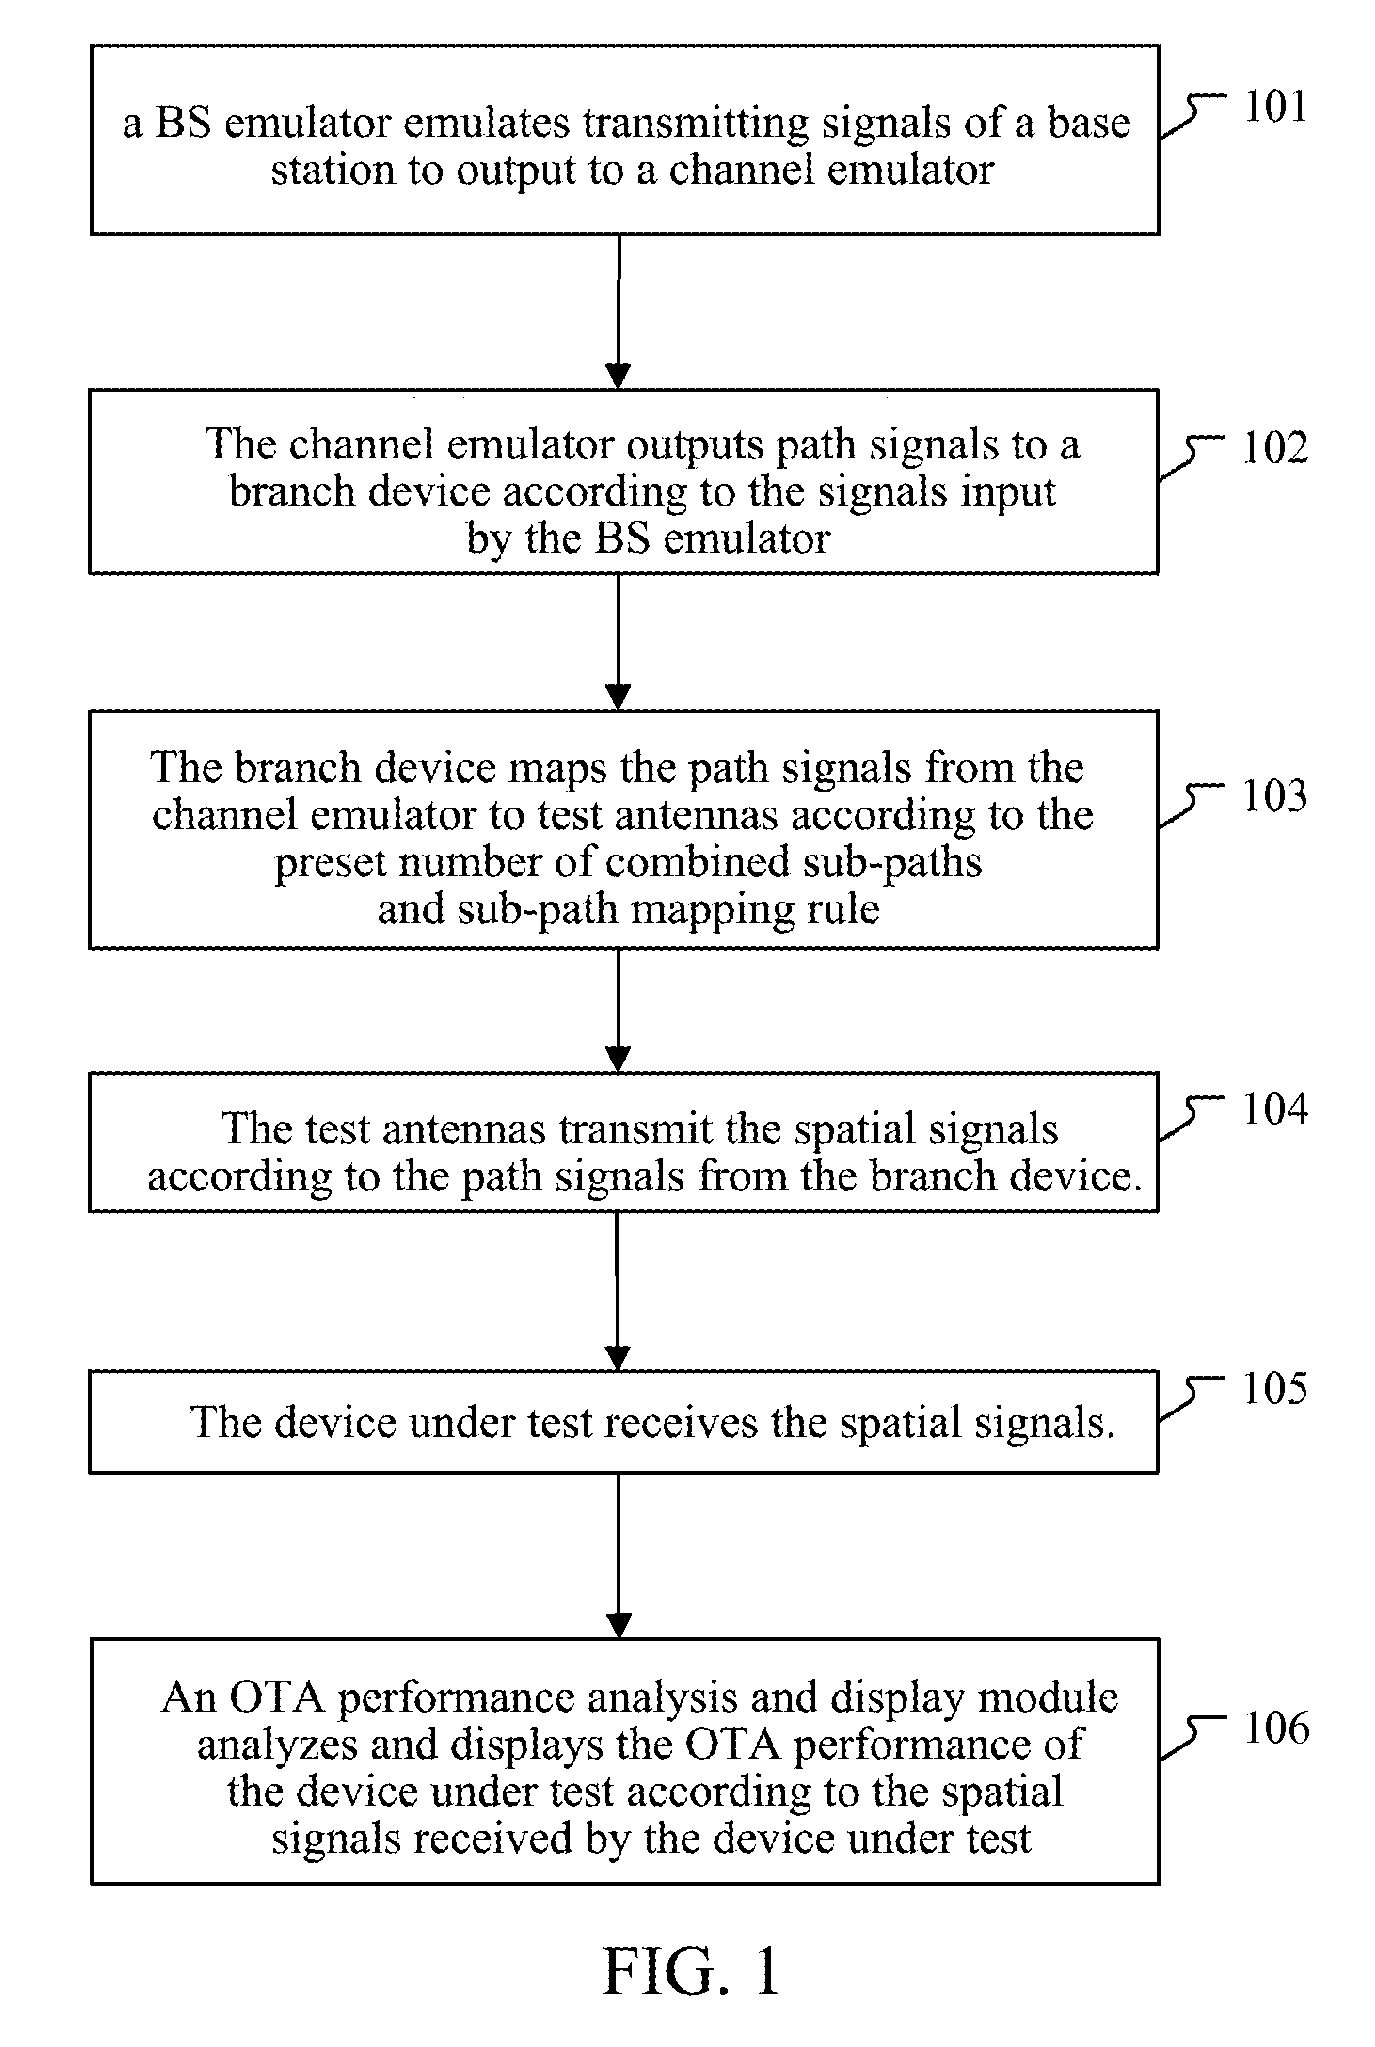 Method and system for spatial radio-frequency performance testing based on multiple-antenna system